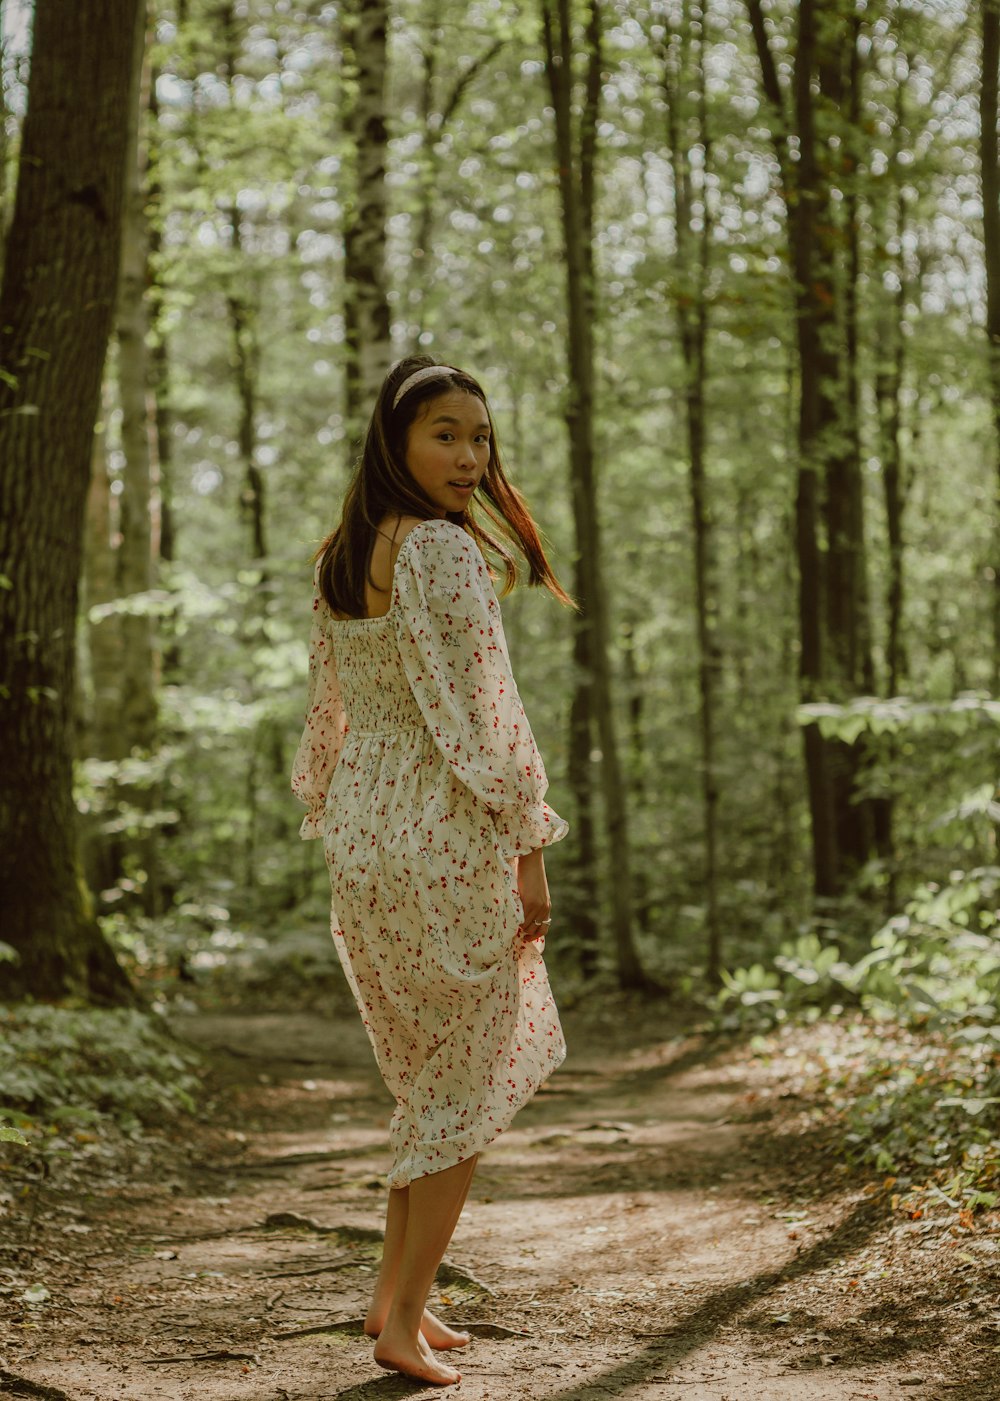 woman in white and brown floral dress standing in forest during daytime